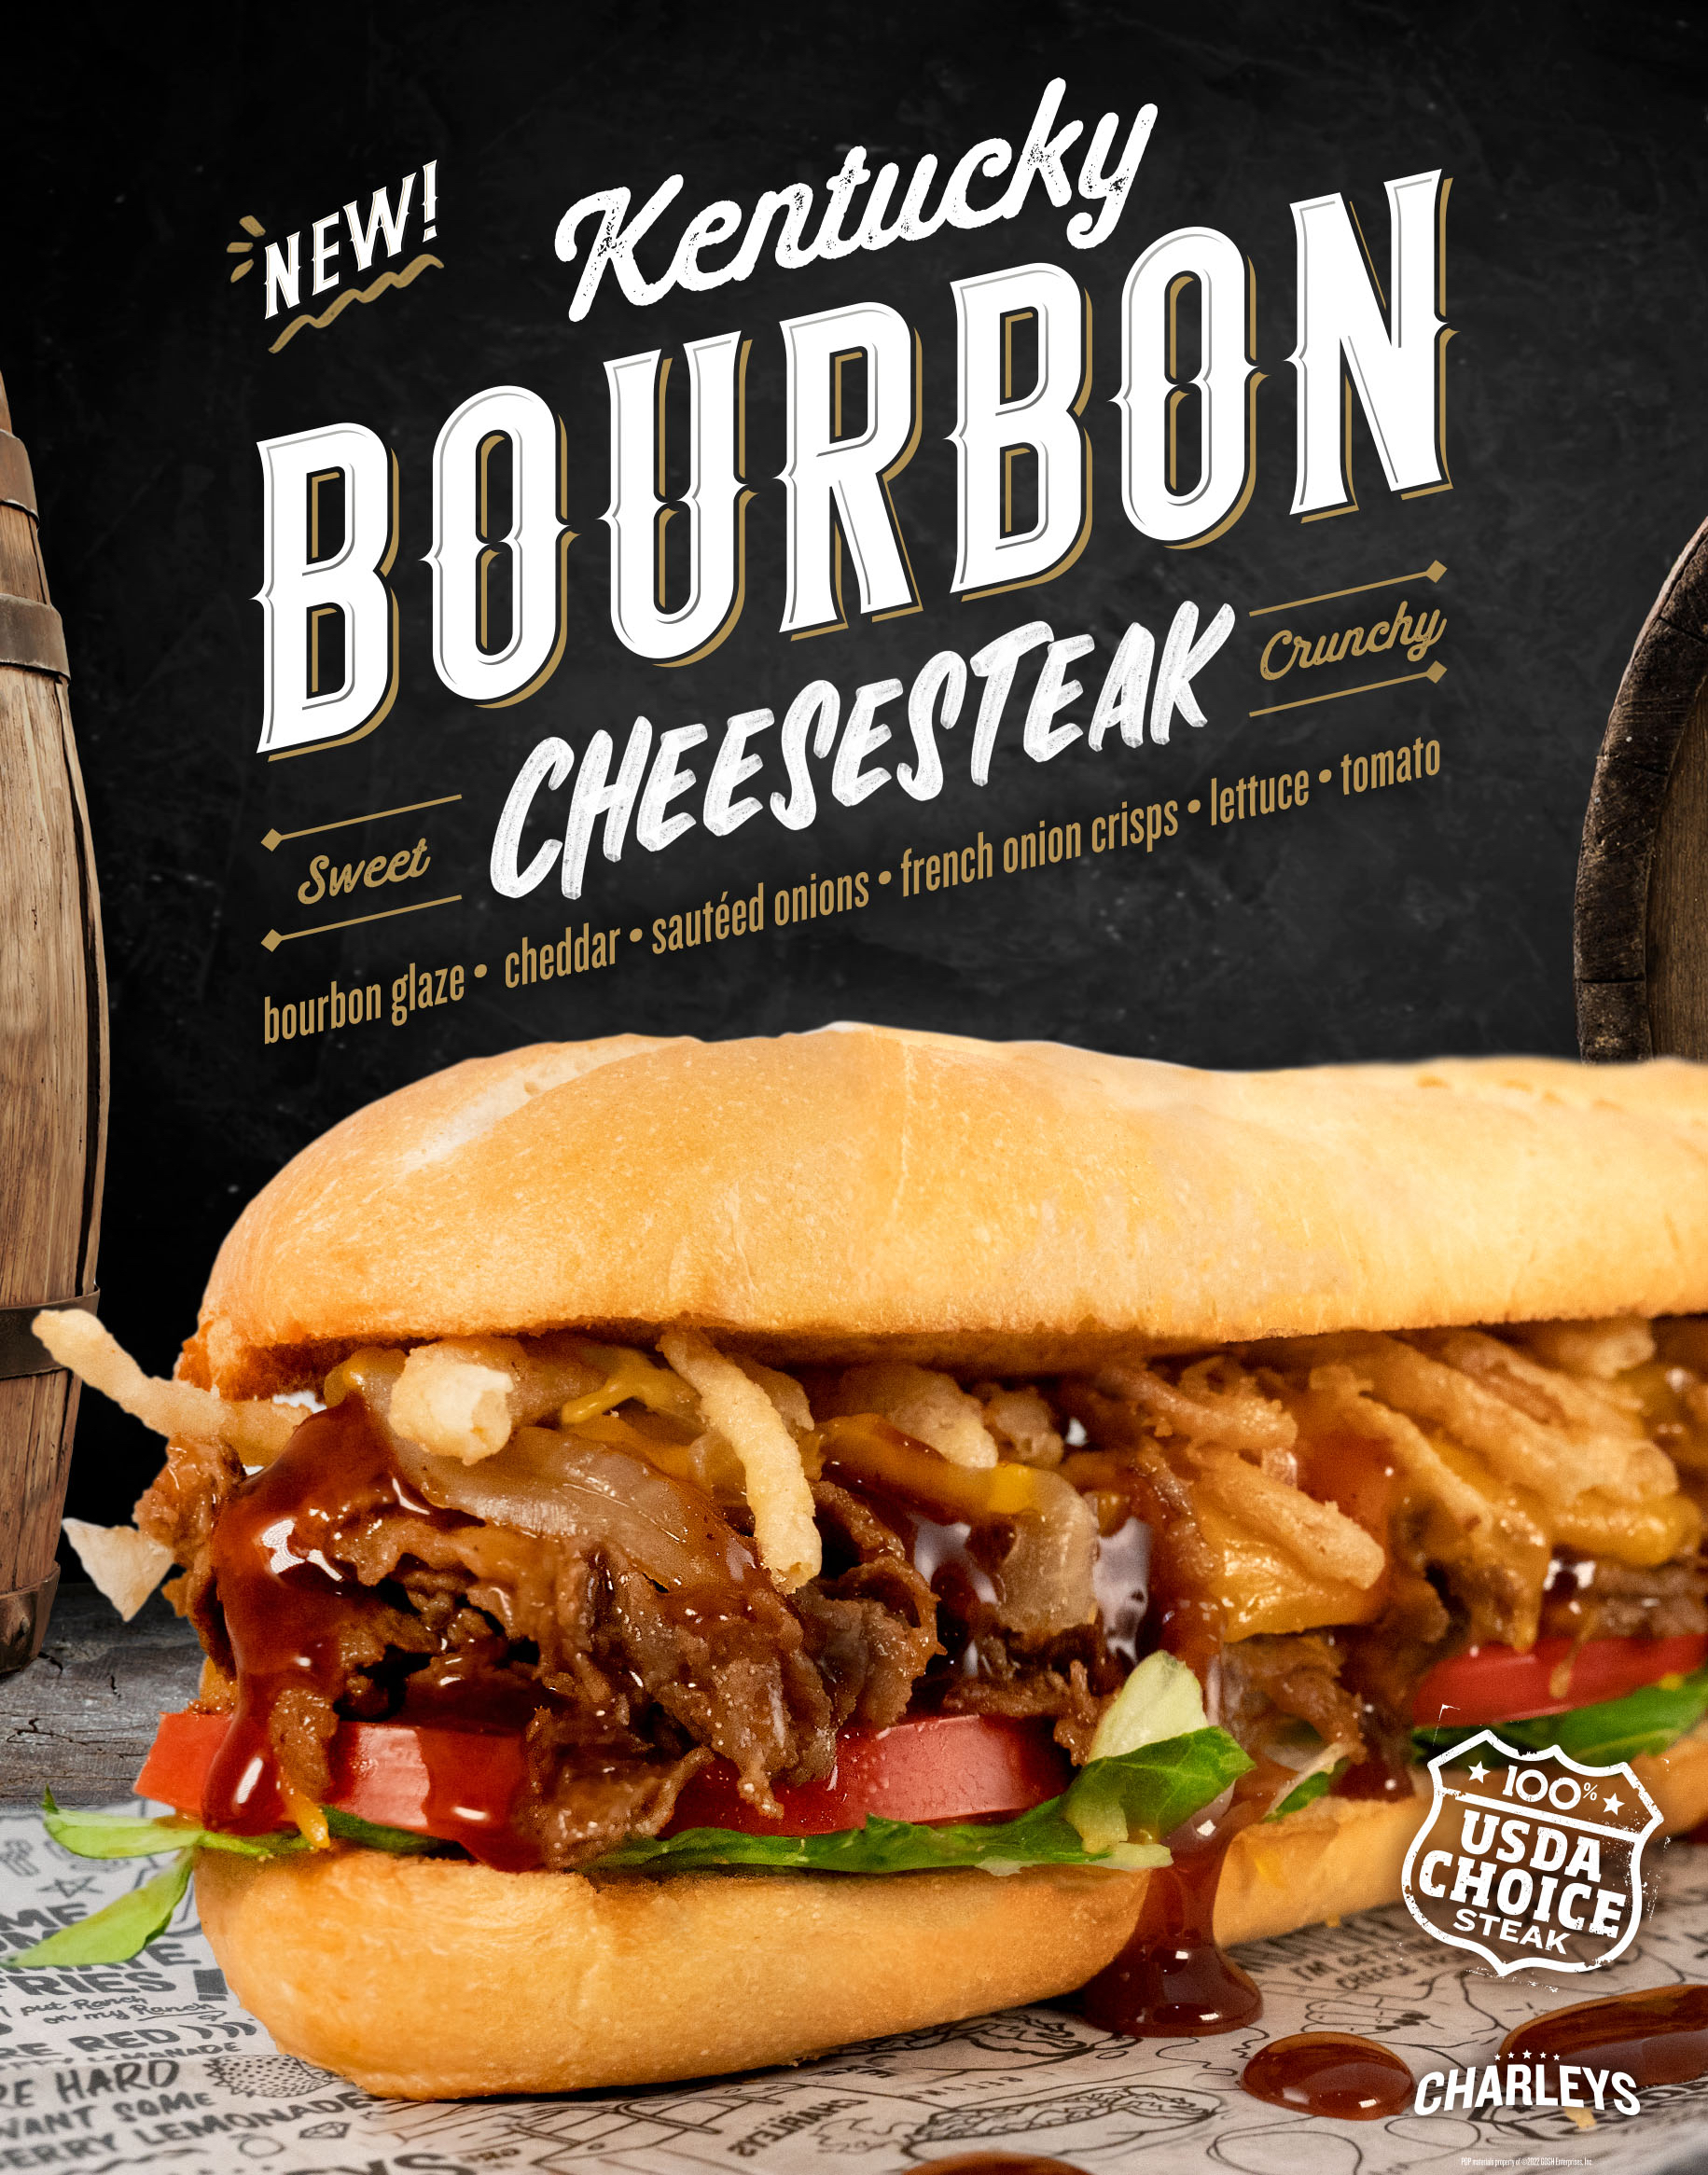 Charleys Cheesesteaks is off to the races in 2023 - with a Kentucky Bourbon Cheesesteak! from Charleys Philly Steaks